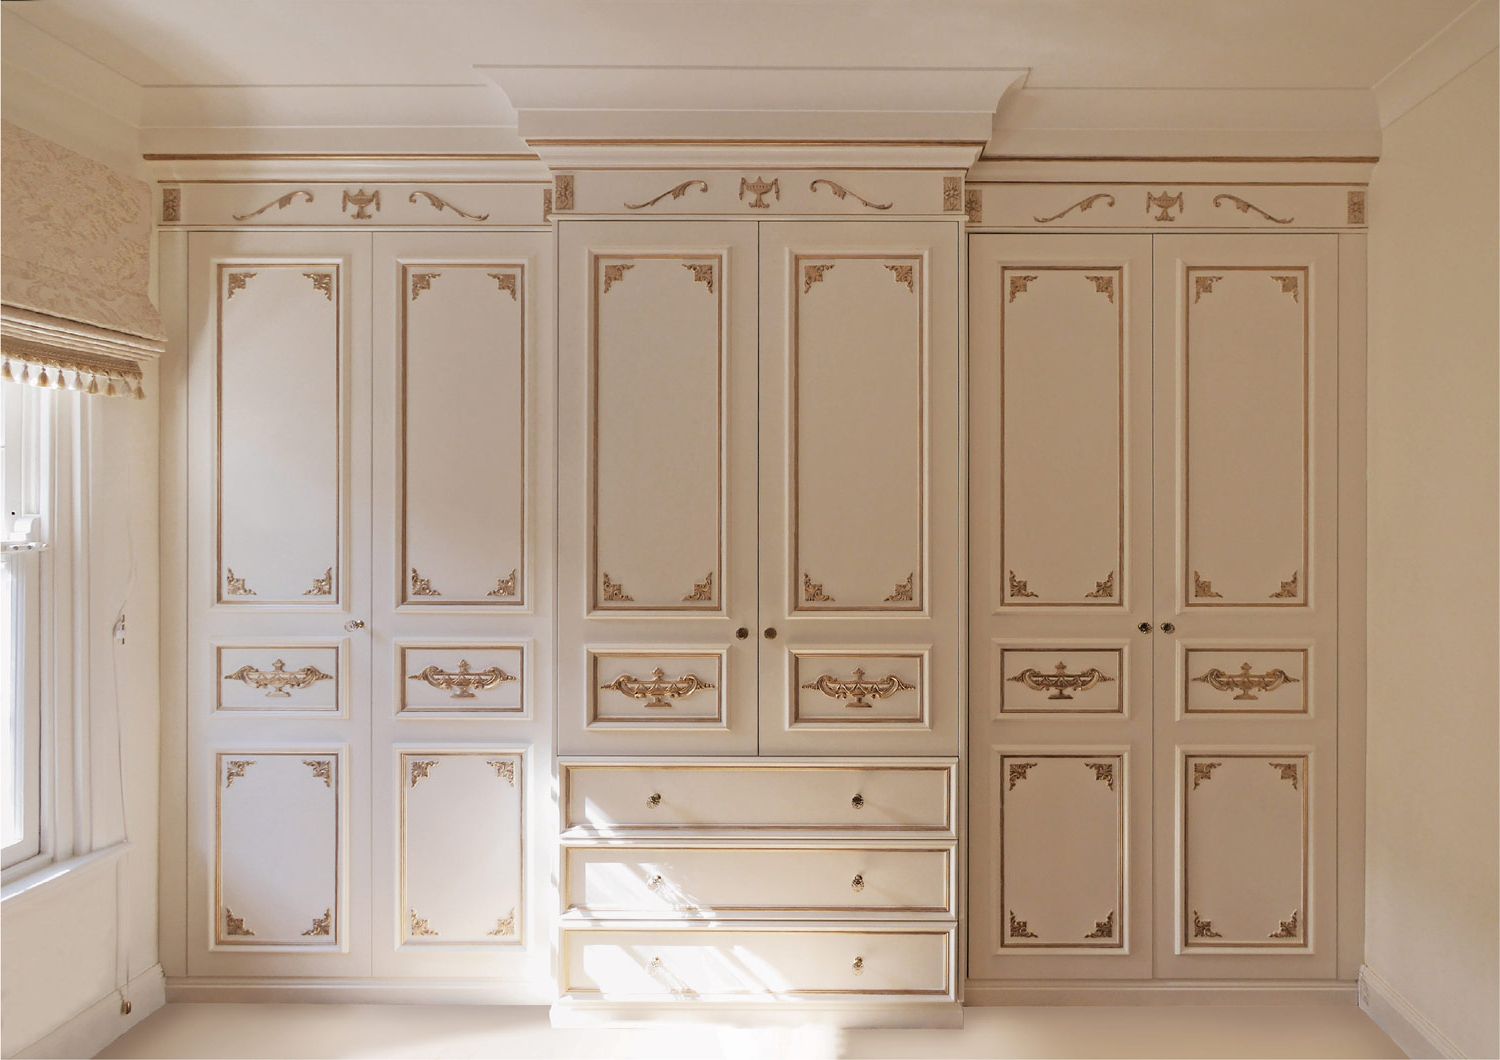 Breathtaking French Wardrobe Designs | Custom Made | Luxury Finishes Intended For French White Wardrobes (Gallery 13 of 20)